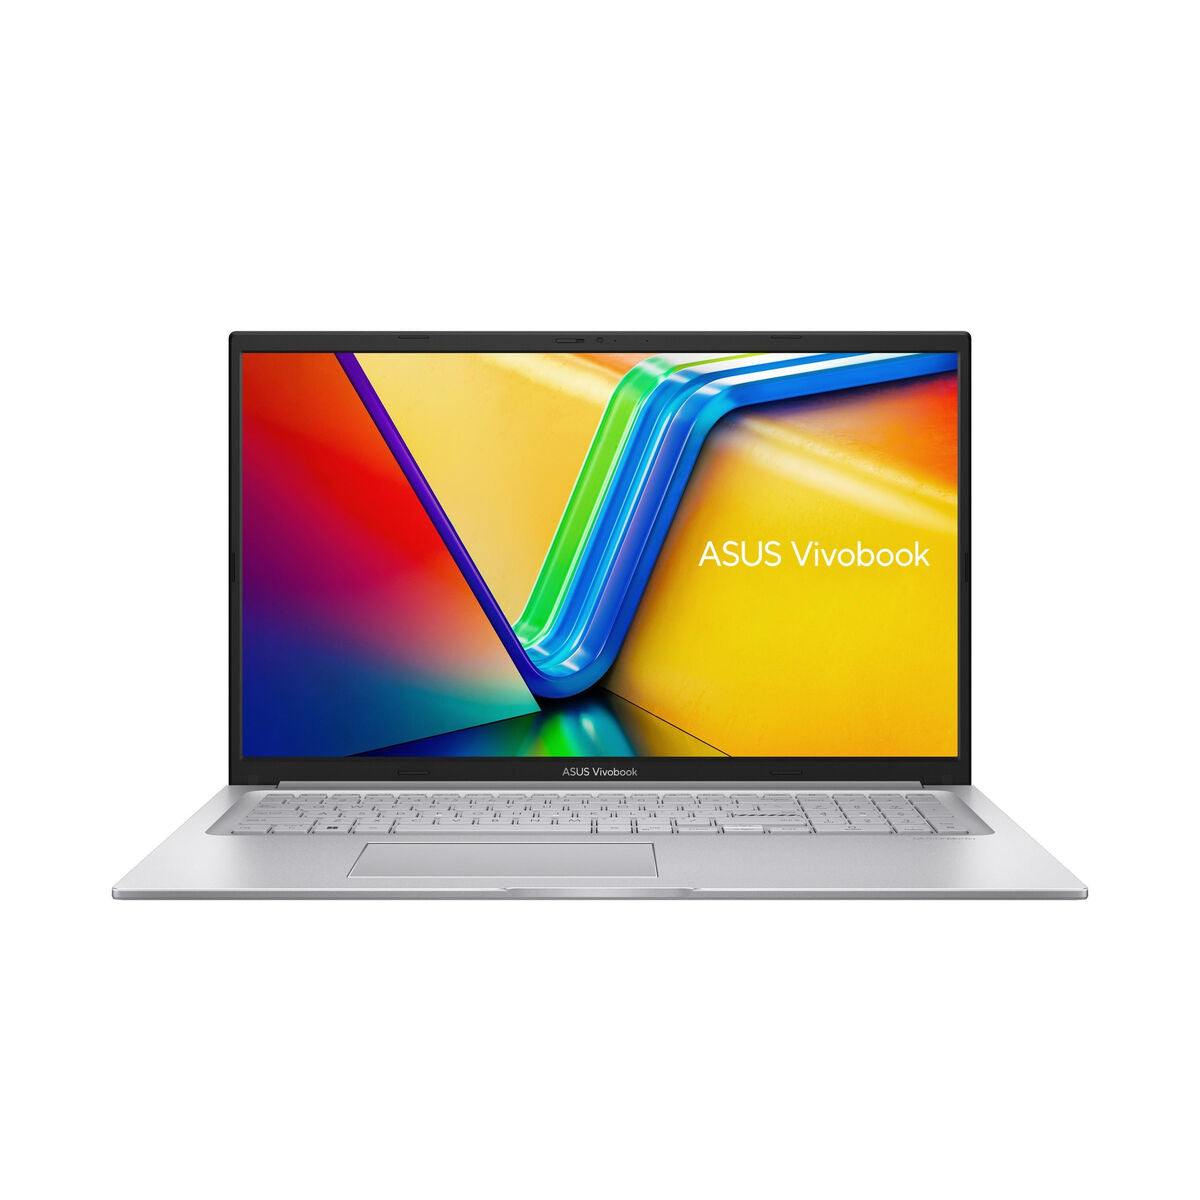 Laptop Asus Vivobook 17 F1704VA-AU083W 17,3" Intel Core i5-1335U 16 GB RAM 512 GB SSD, Asus, Computing, notebook-asus-vivobook-17-f1704va-au083w-512-gb-ssd-16-gb-ram-i5-1335u, :2-in-1, :512 GB, :Intel-i5, :QWERTY, :RAM 16 GB, :Touchscreen, Brand_Asus, category-reference-2609, category-reference-2791, category-reference-2797, category-reference-t-19685, Condition_NEW, office, Price_900 - 1000, Teleworking, RiotNook